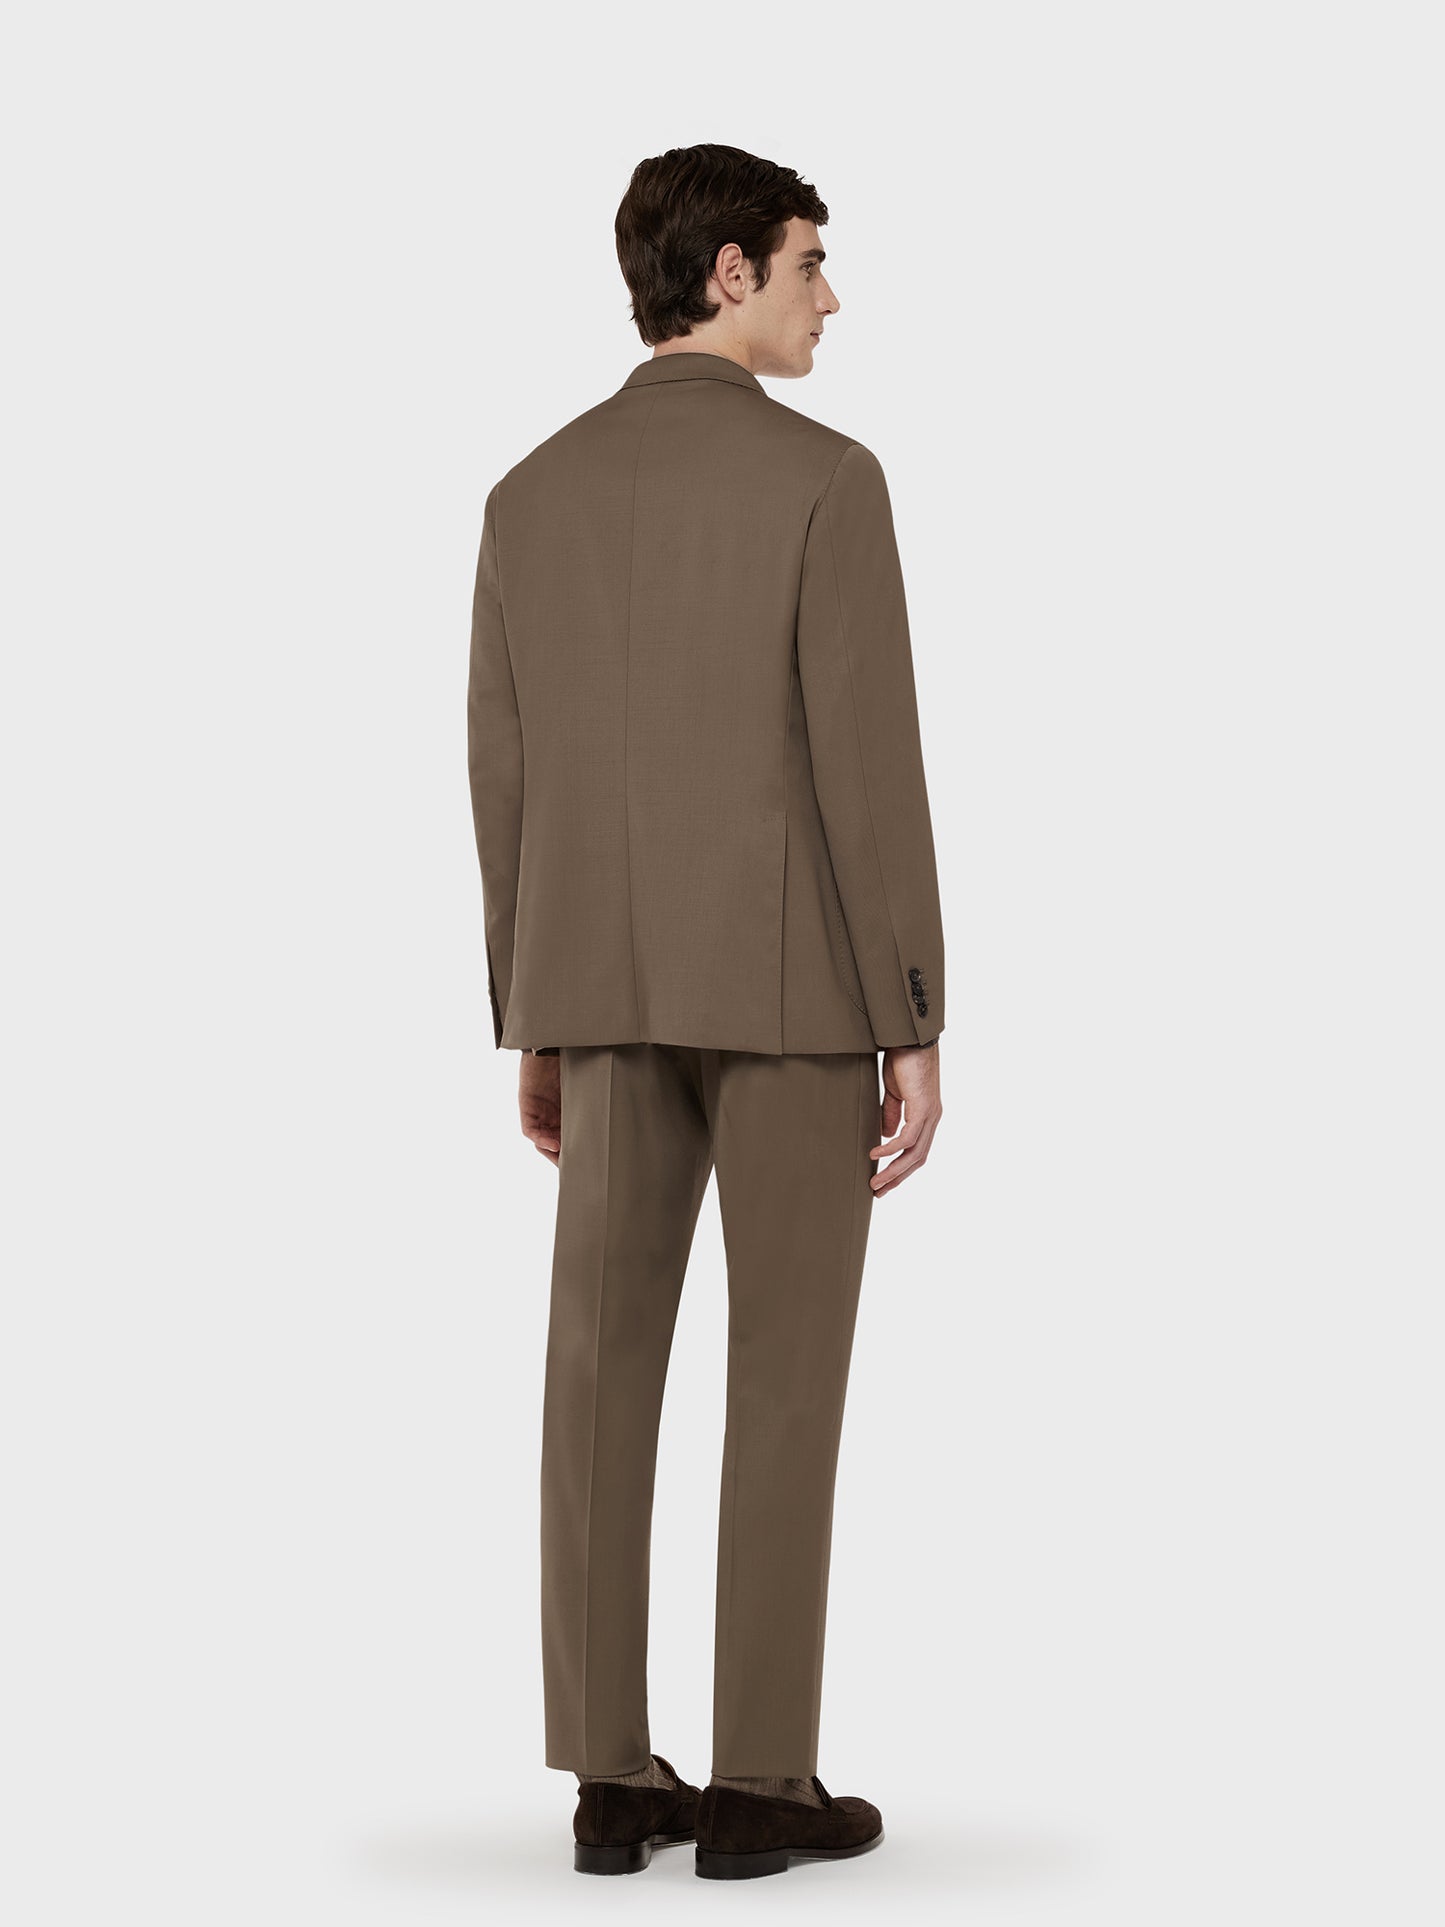 Aida double-breasted suit in brown wool